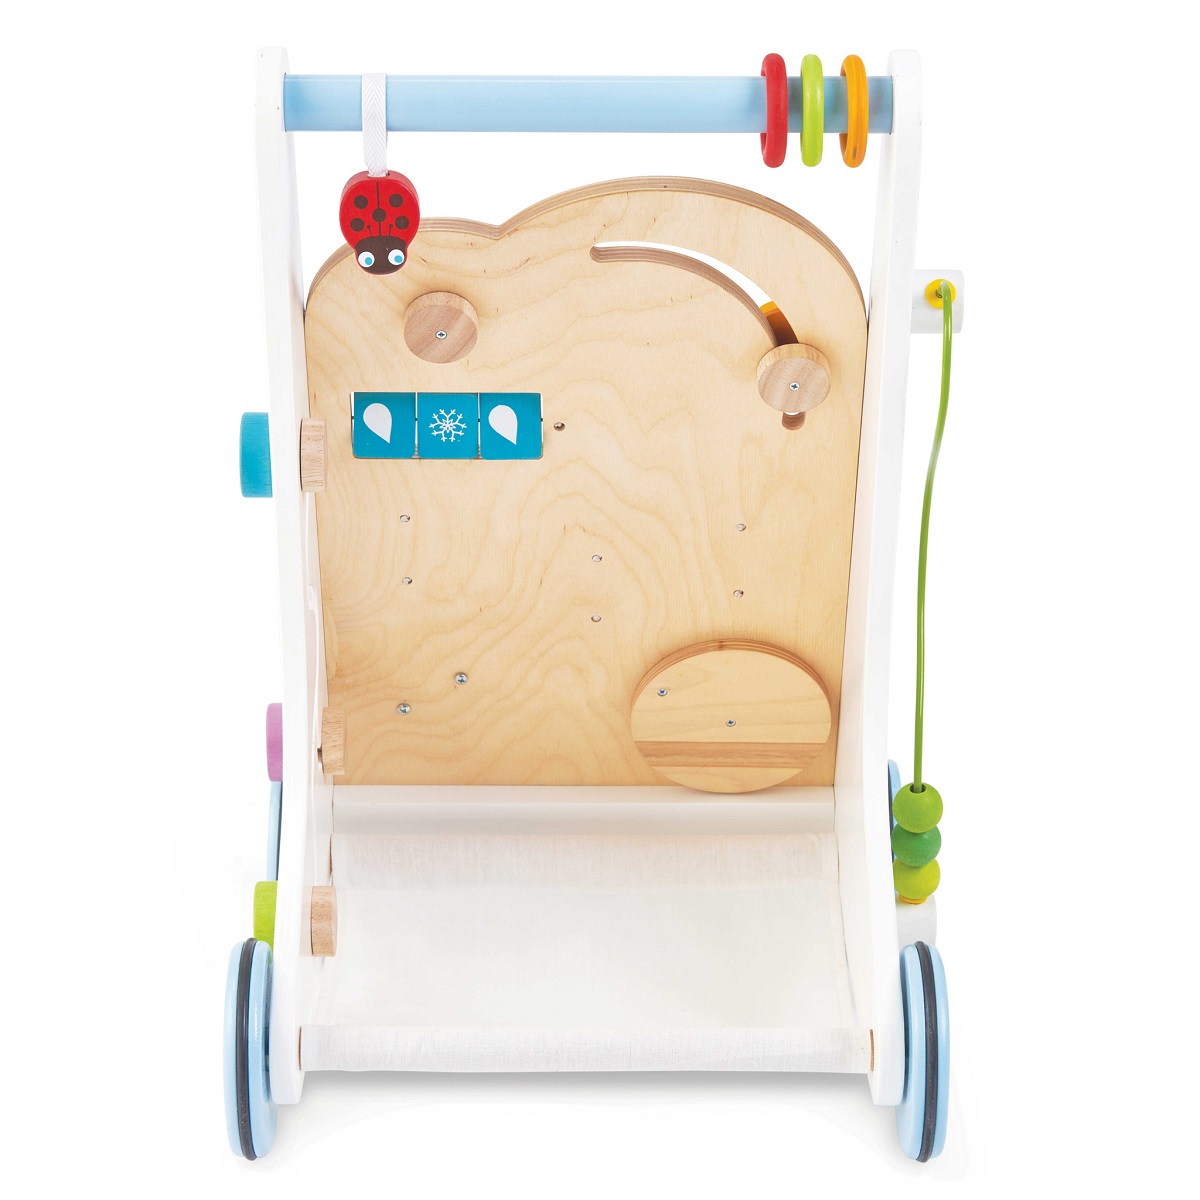 Baby and Toddler - Activity Walker